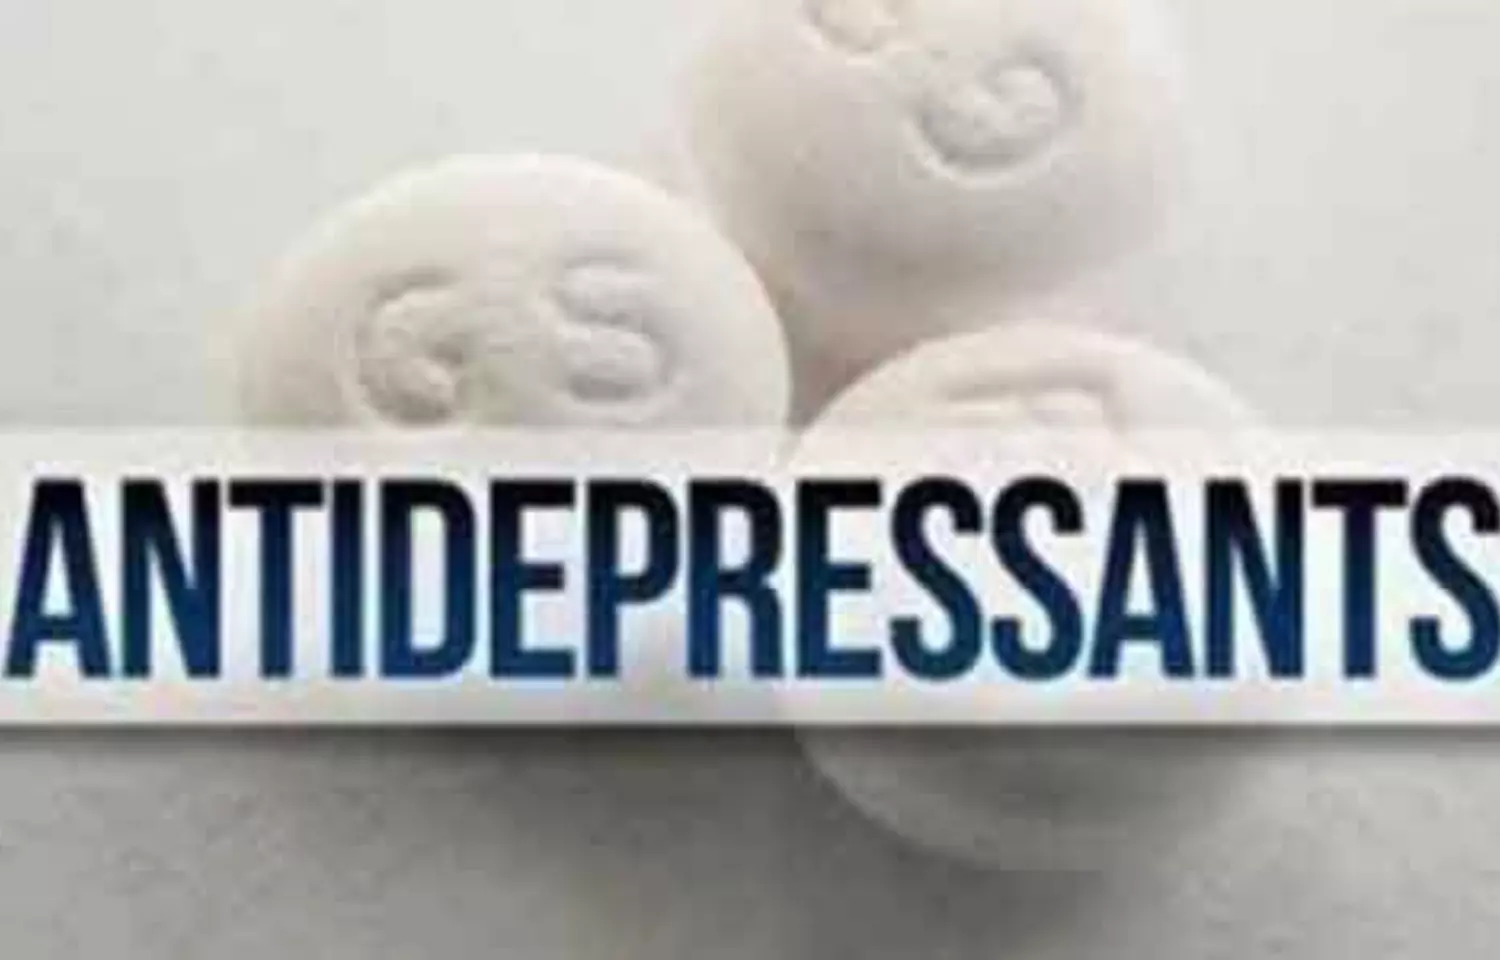 Antidepressants are not associated with improved quality of life in the long run